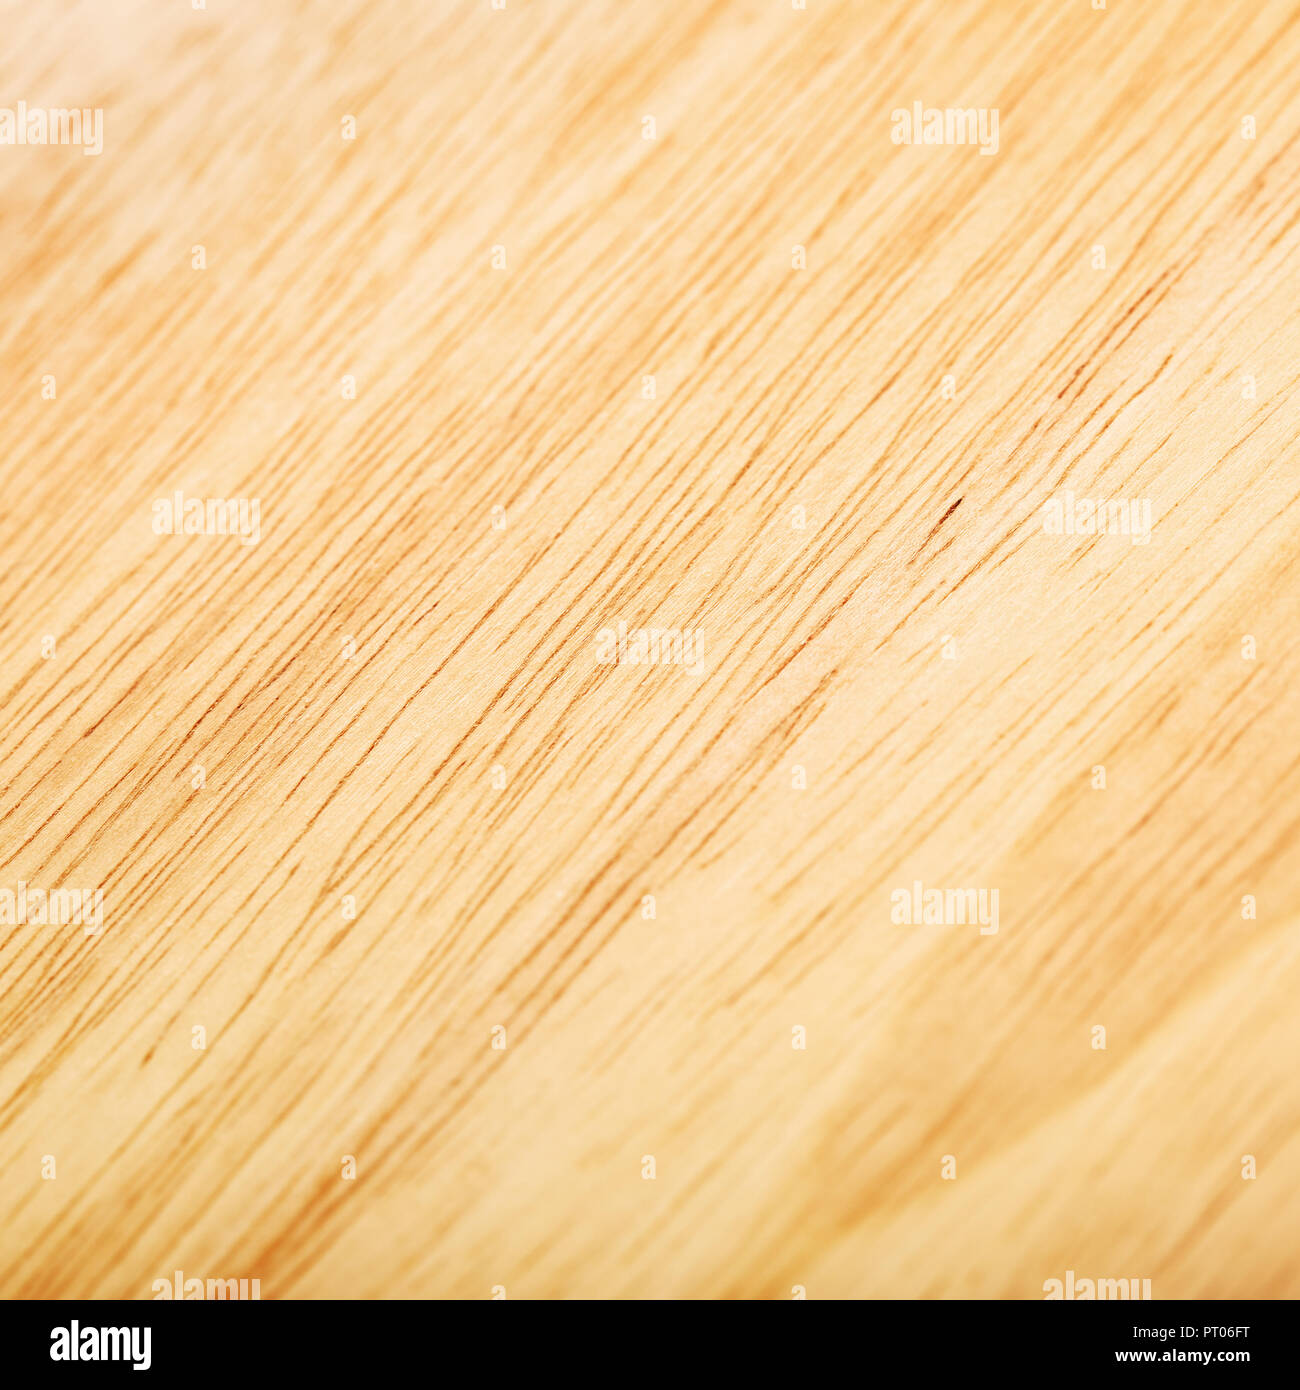 warm brown wooden texture, close up background Stock Photo